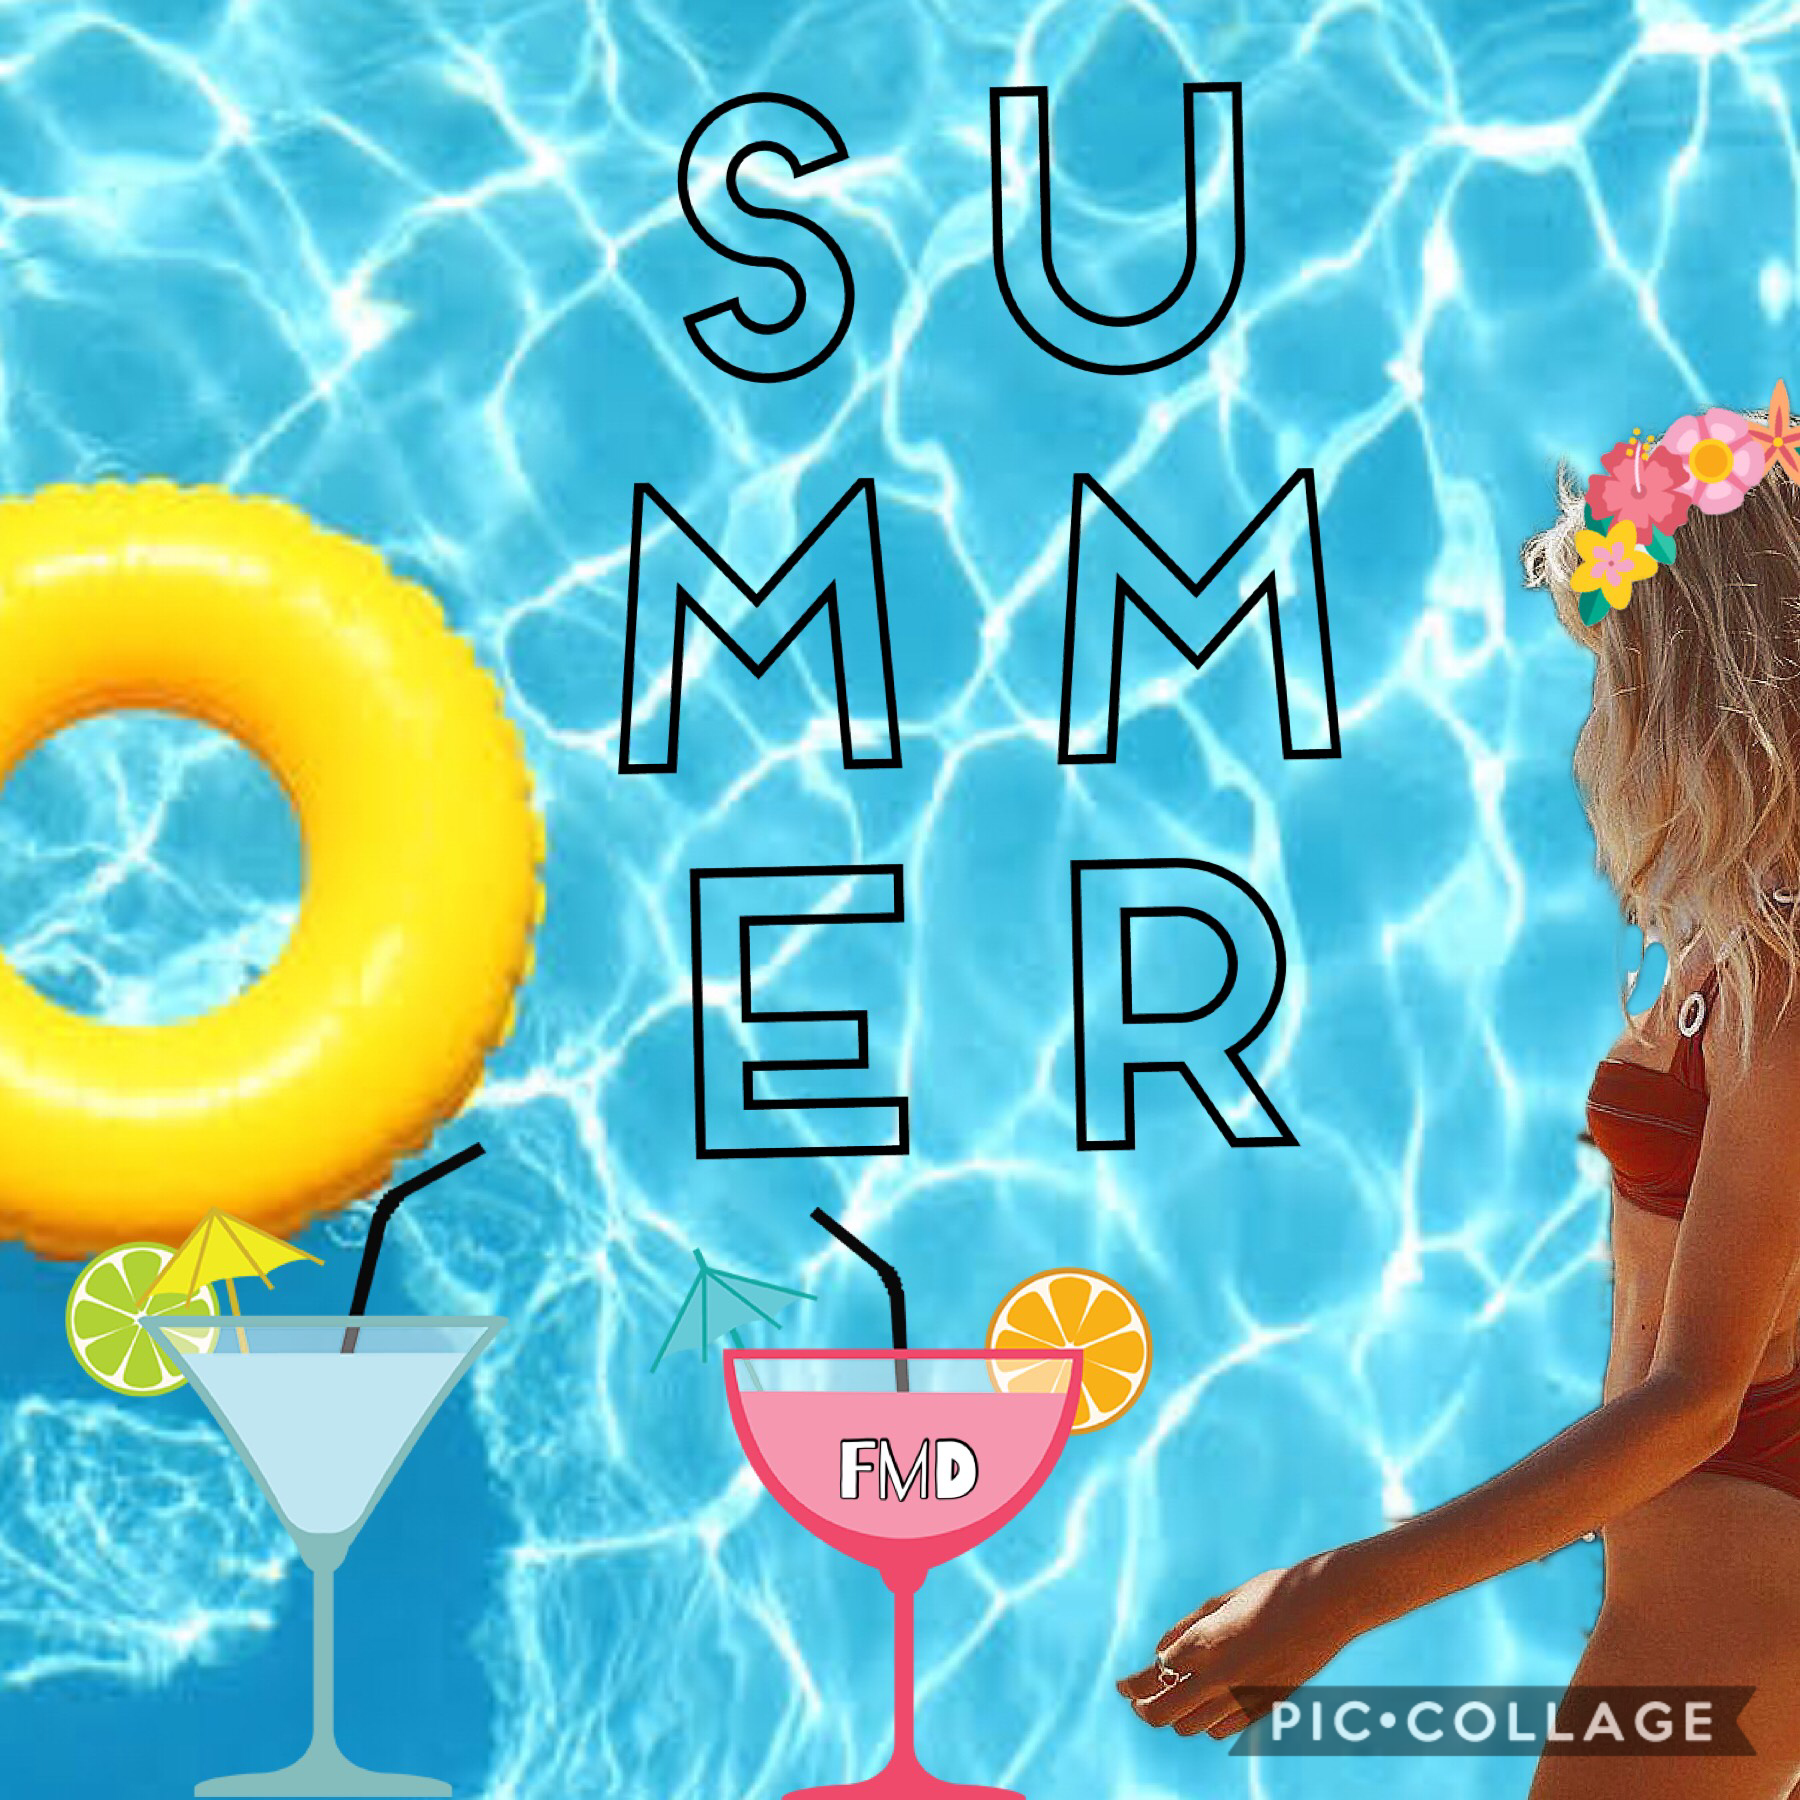 TAP

First day of summer! Comment down bellow what season your in?